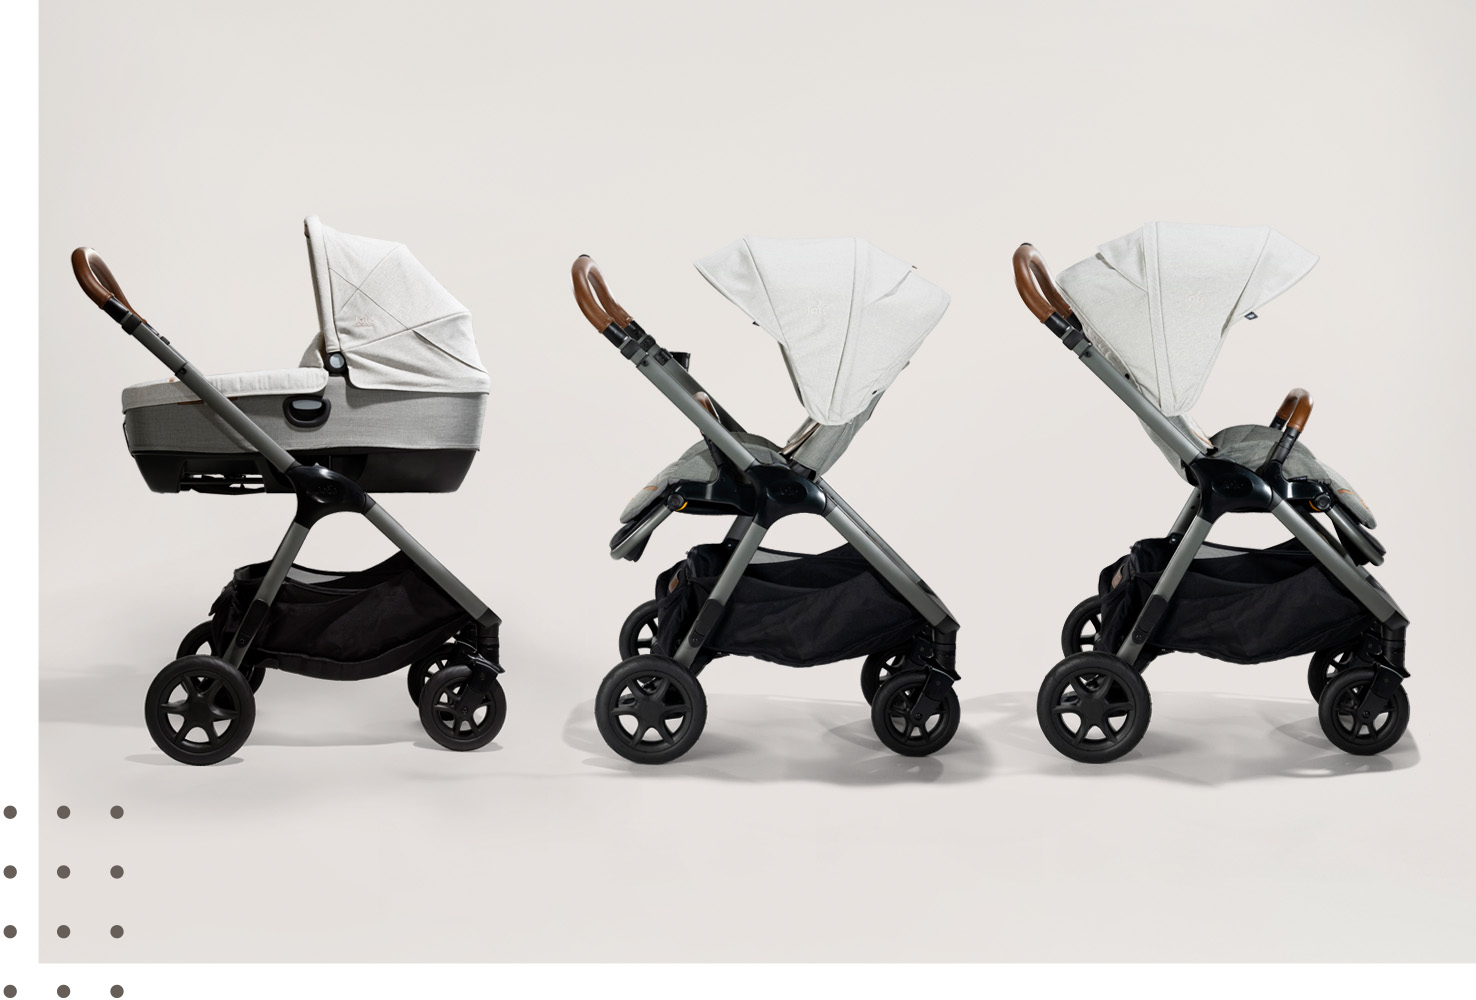  3 Joie Signature Finiti pushchairs in profile showing the mode options. From left to right: carry cot mode paired with Calmi R129, parent facing pushchair mode, and forward facing pushchair mode.